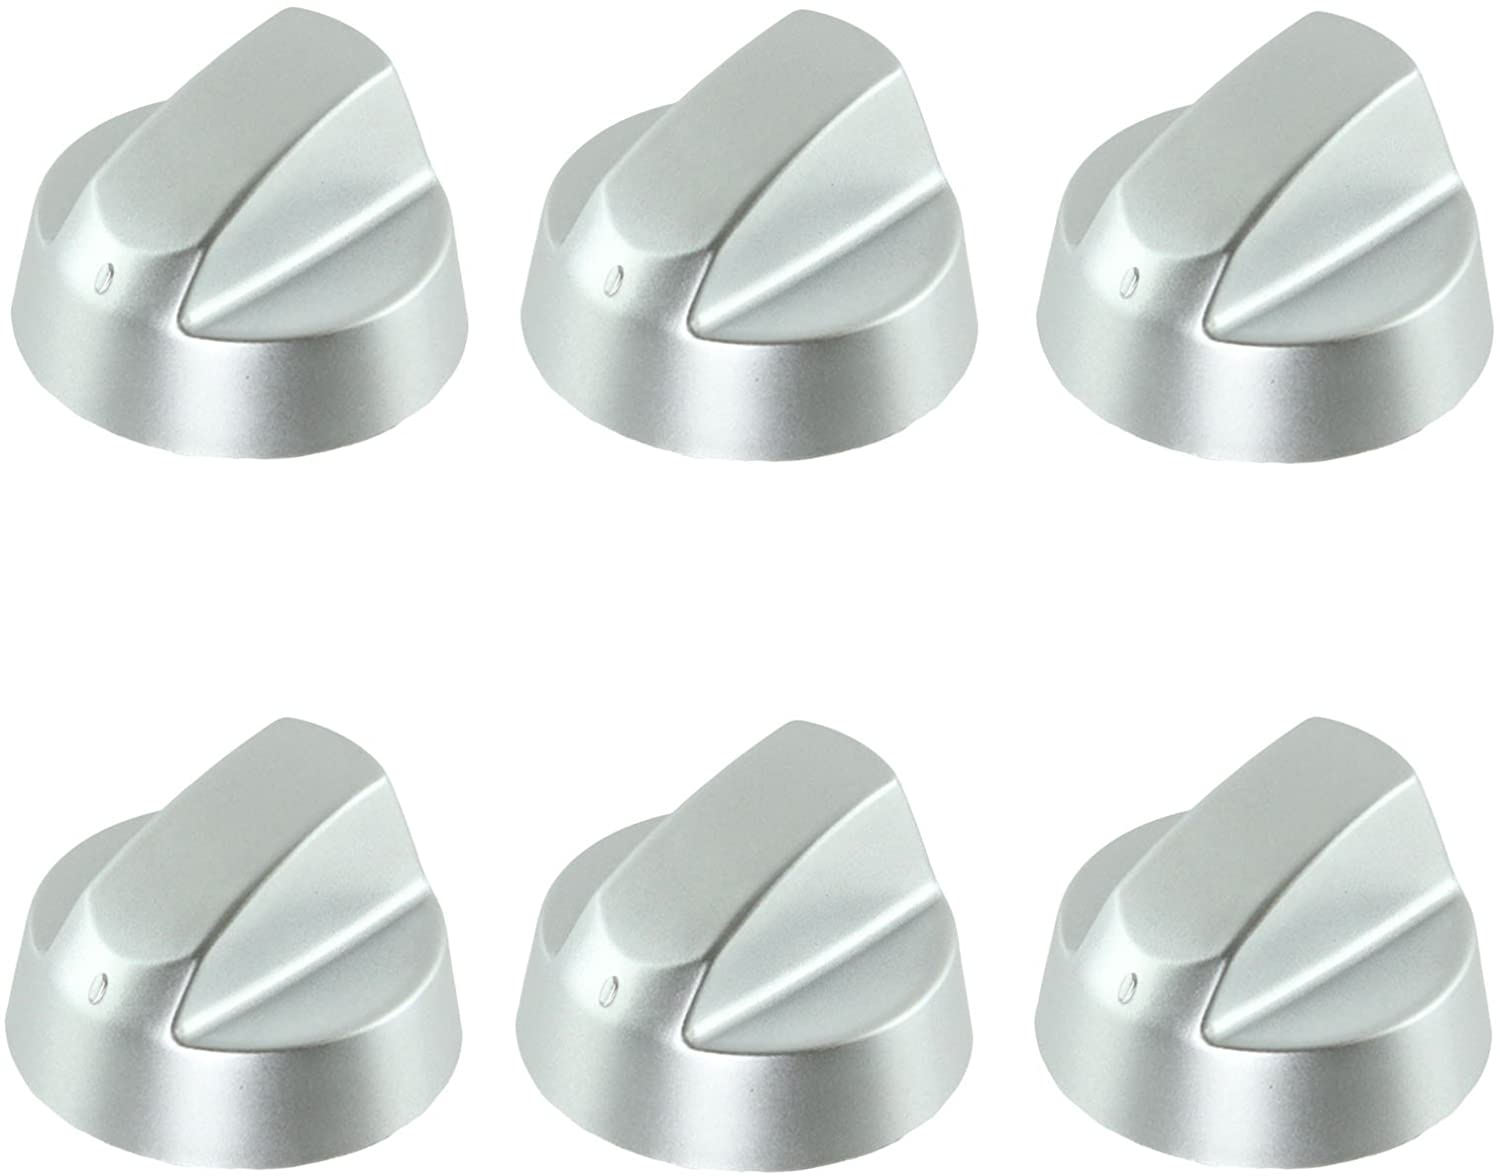 UNIVERSAL Control Knob Dial & Adaptors for Toaster, Oven & Trouser Press (Silver, Pack of 6)